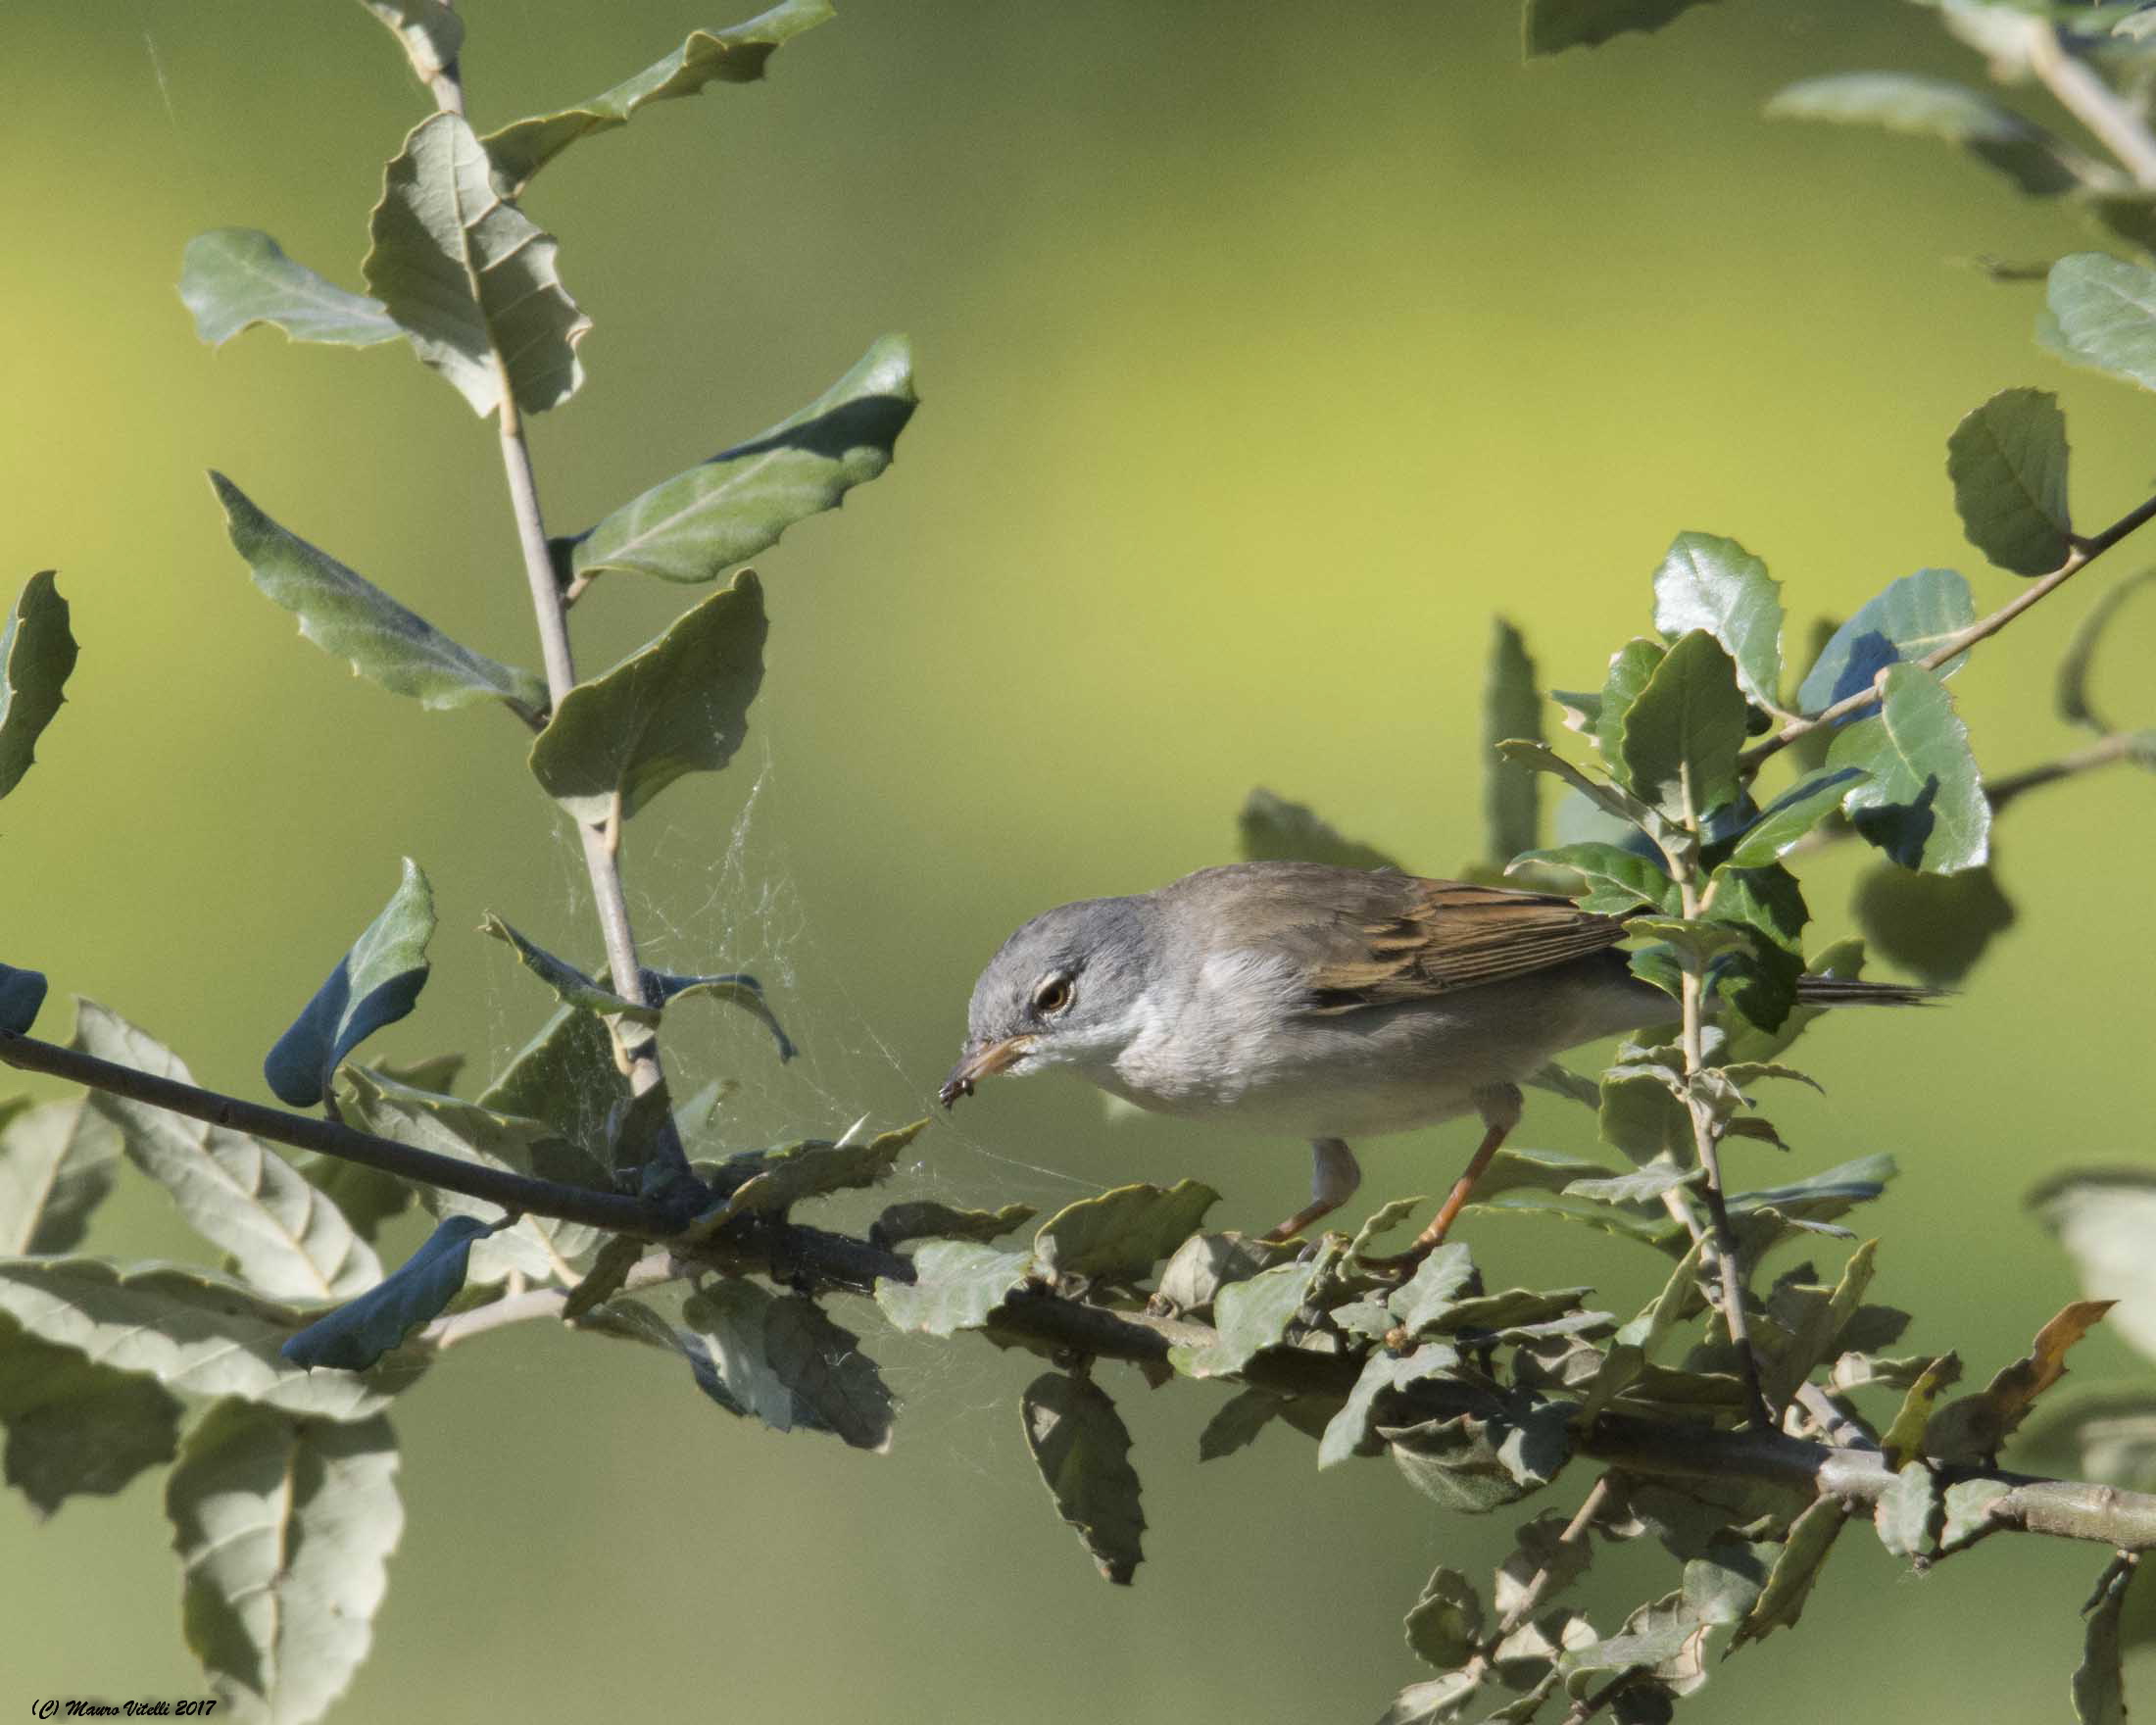 The meal of the Whitethroat (Sylvia communis)...